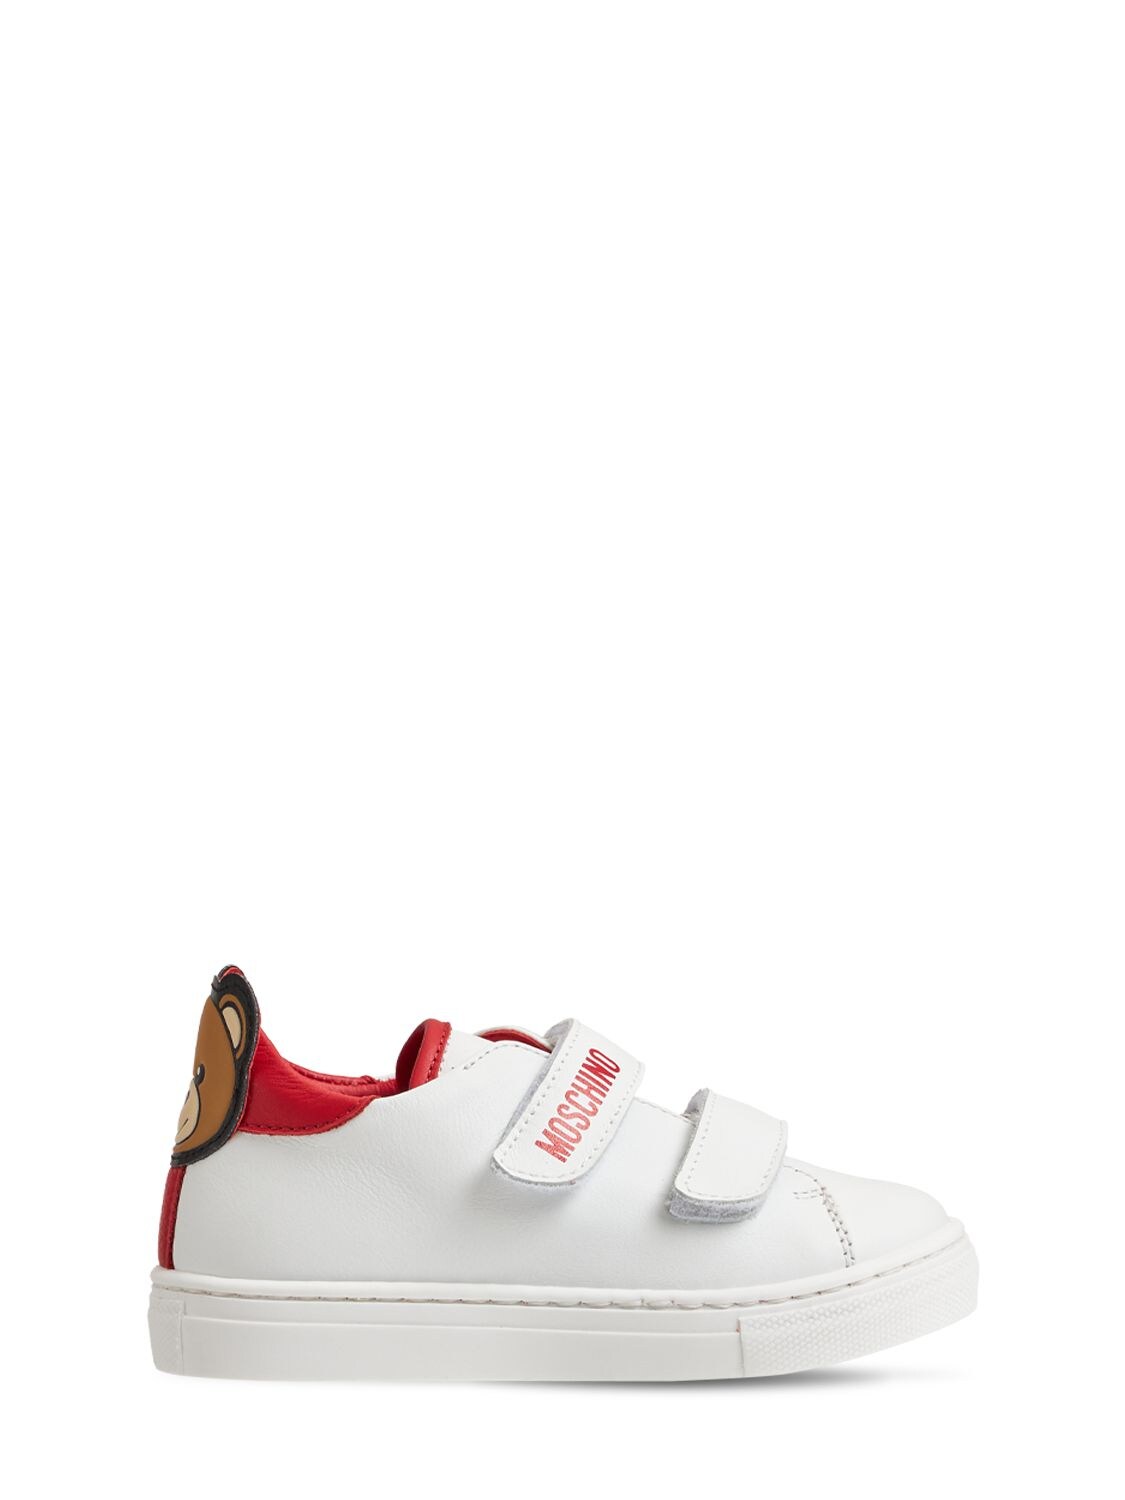 Moschino Kids' Leather Strap Trainers W/ Patch In White,red